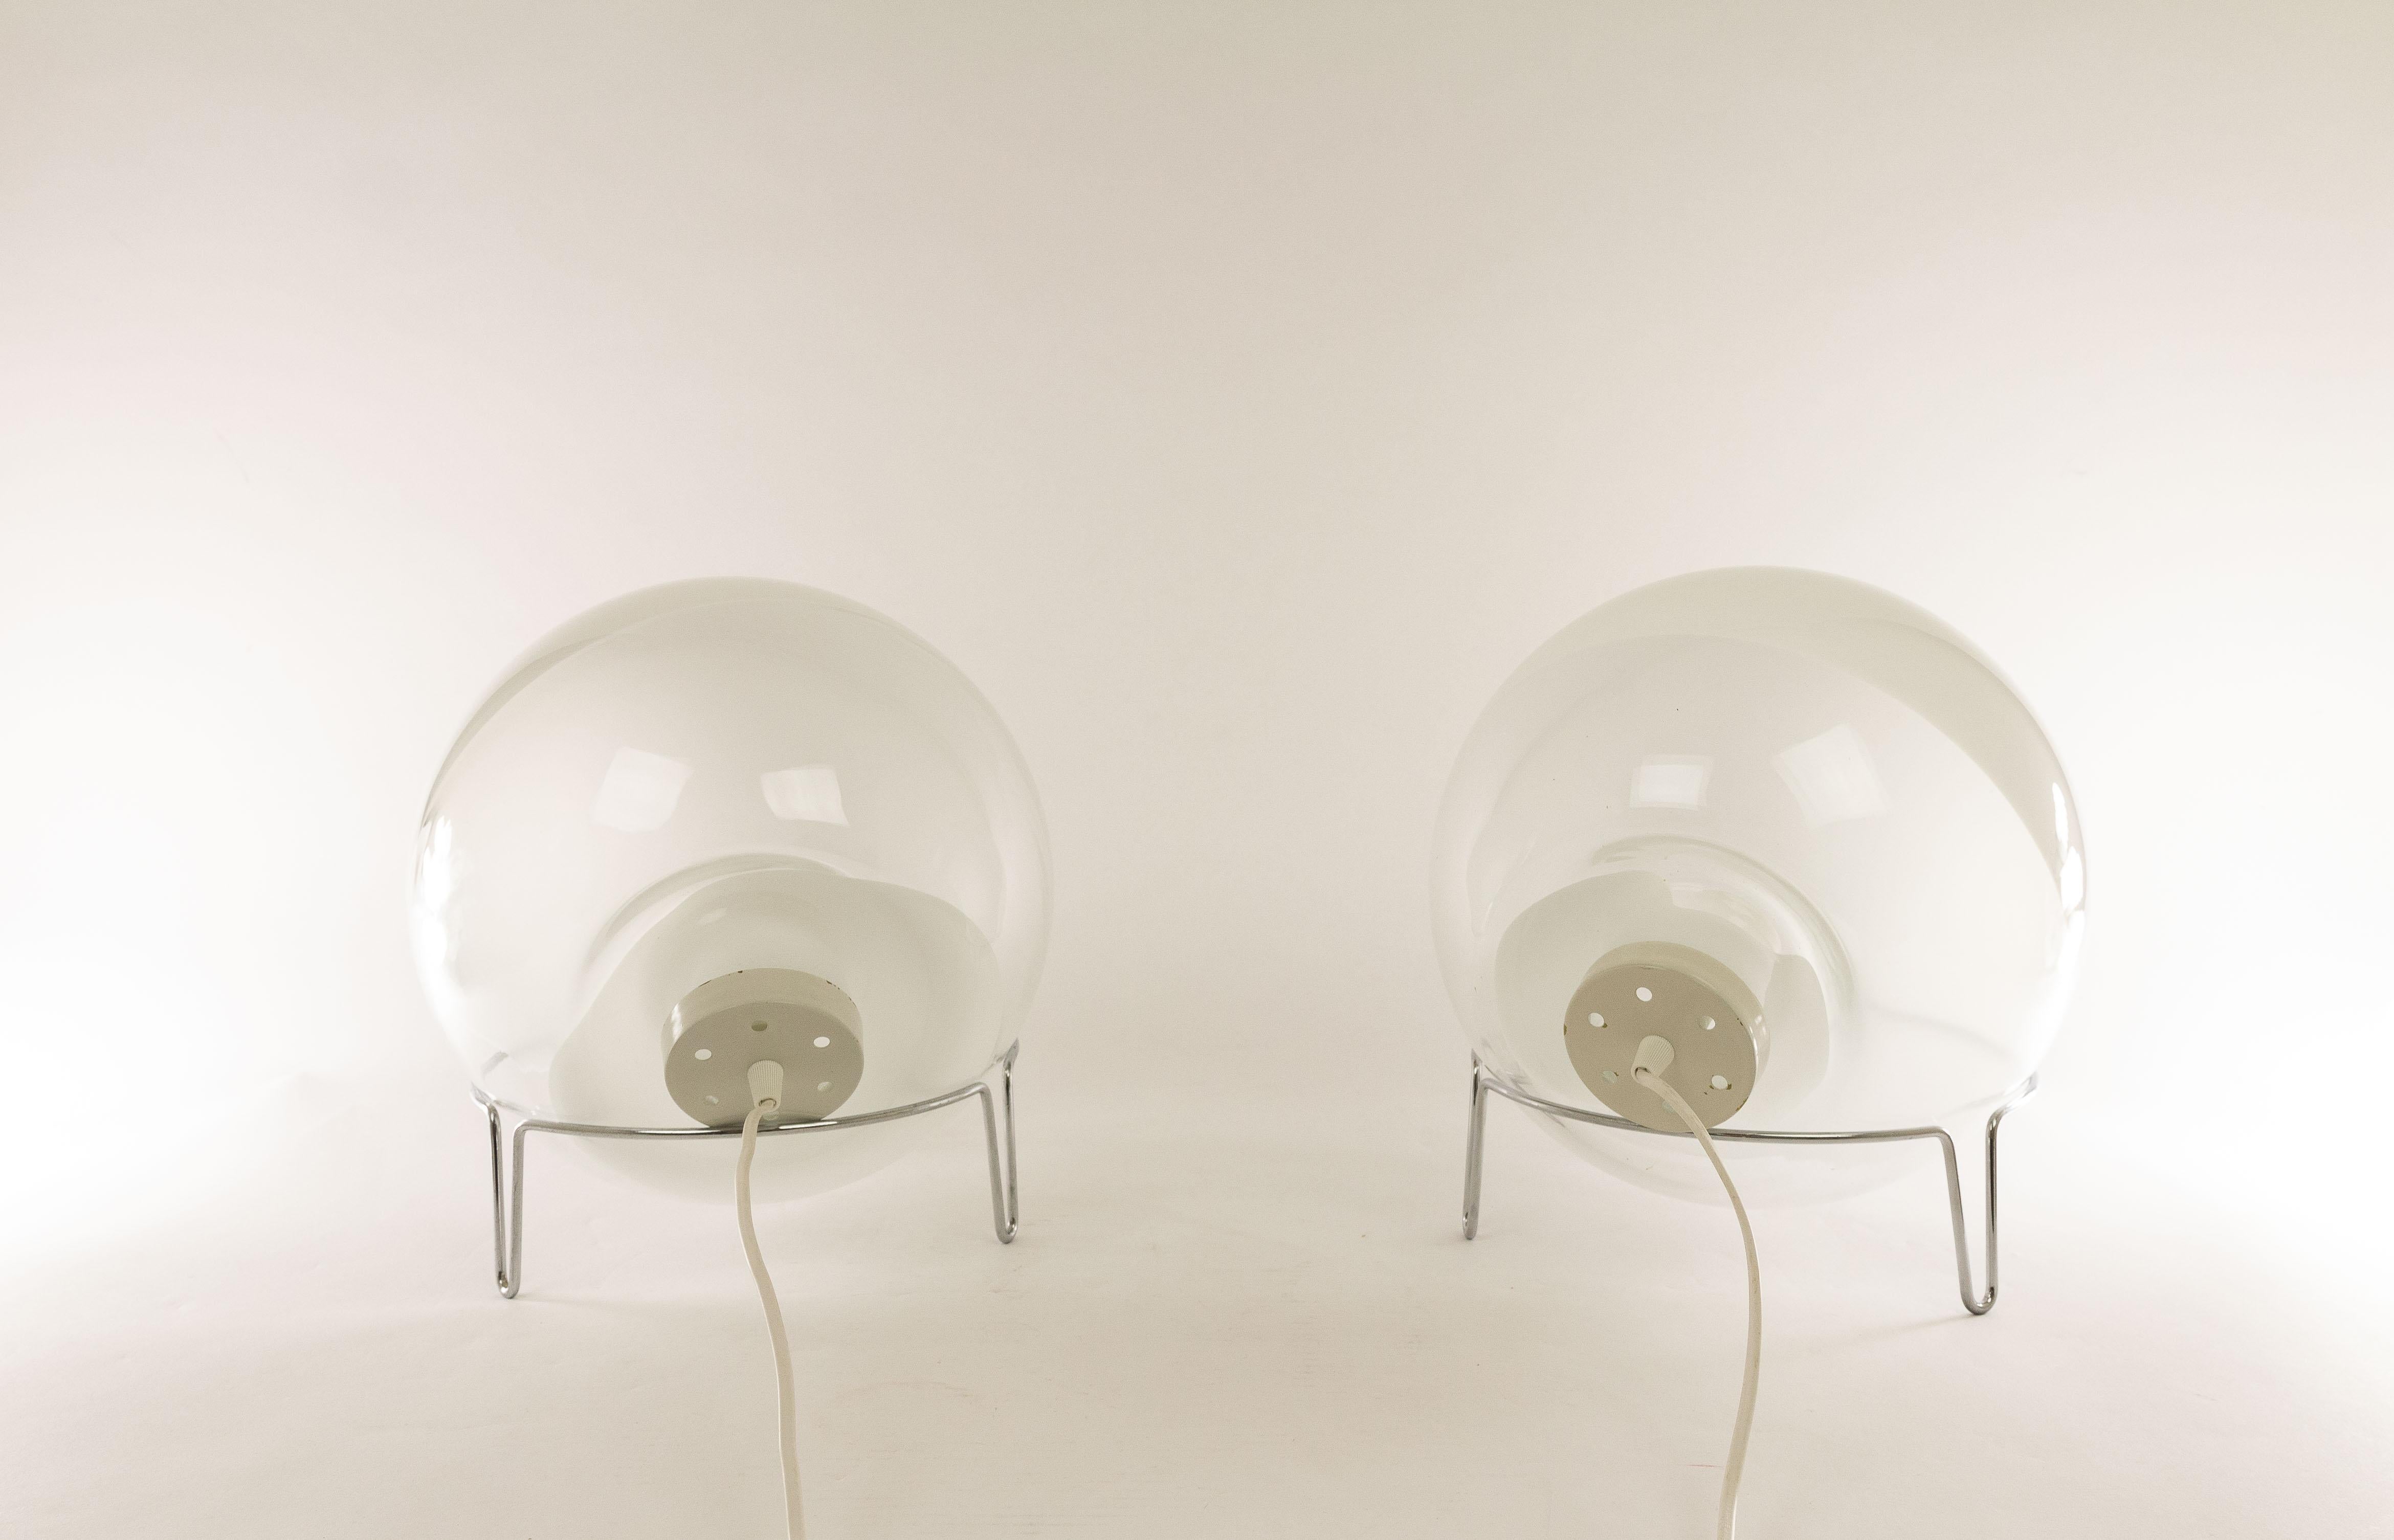 Italian Pair of Medium Sized Glass Table Lamps by Angelo Mangiarotti for Skipper, 1980s